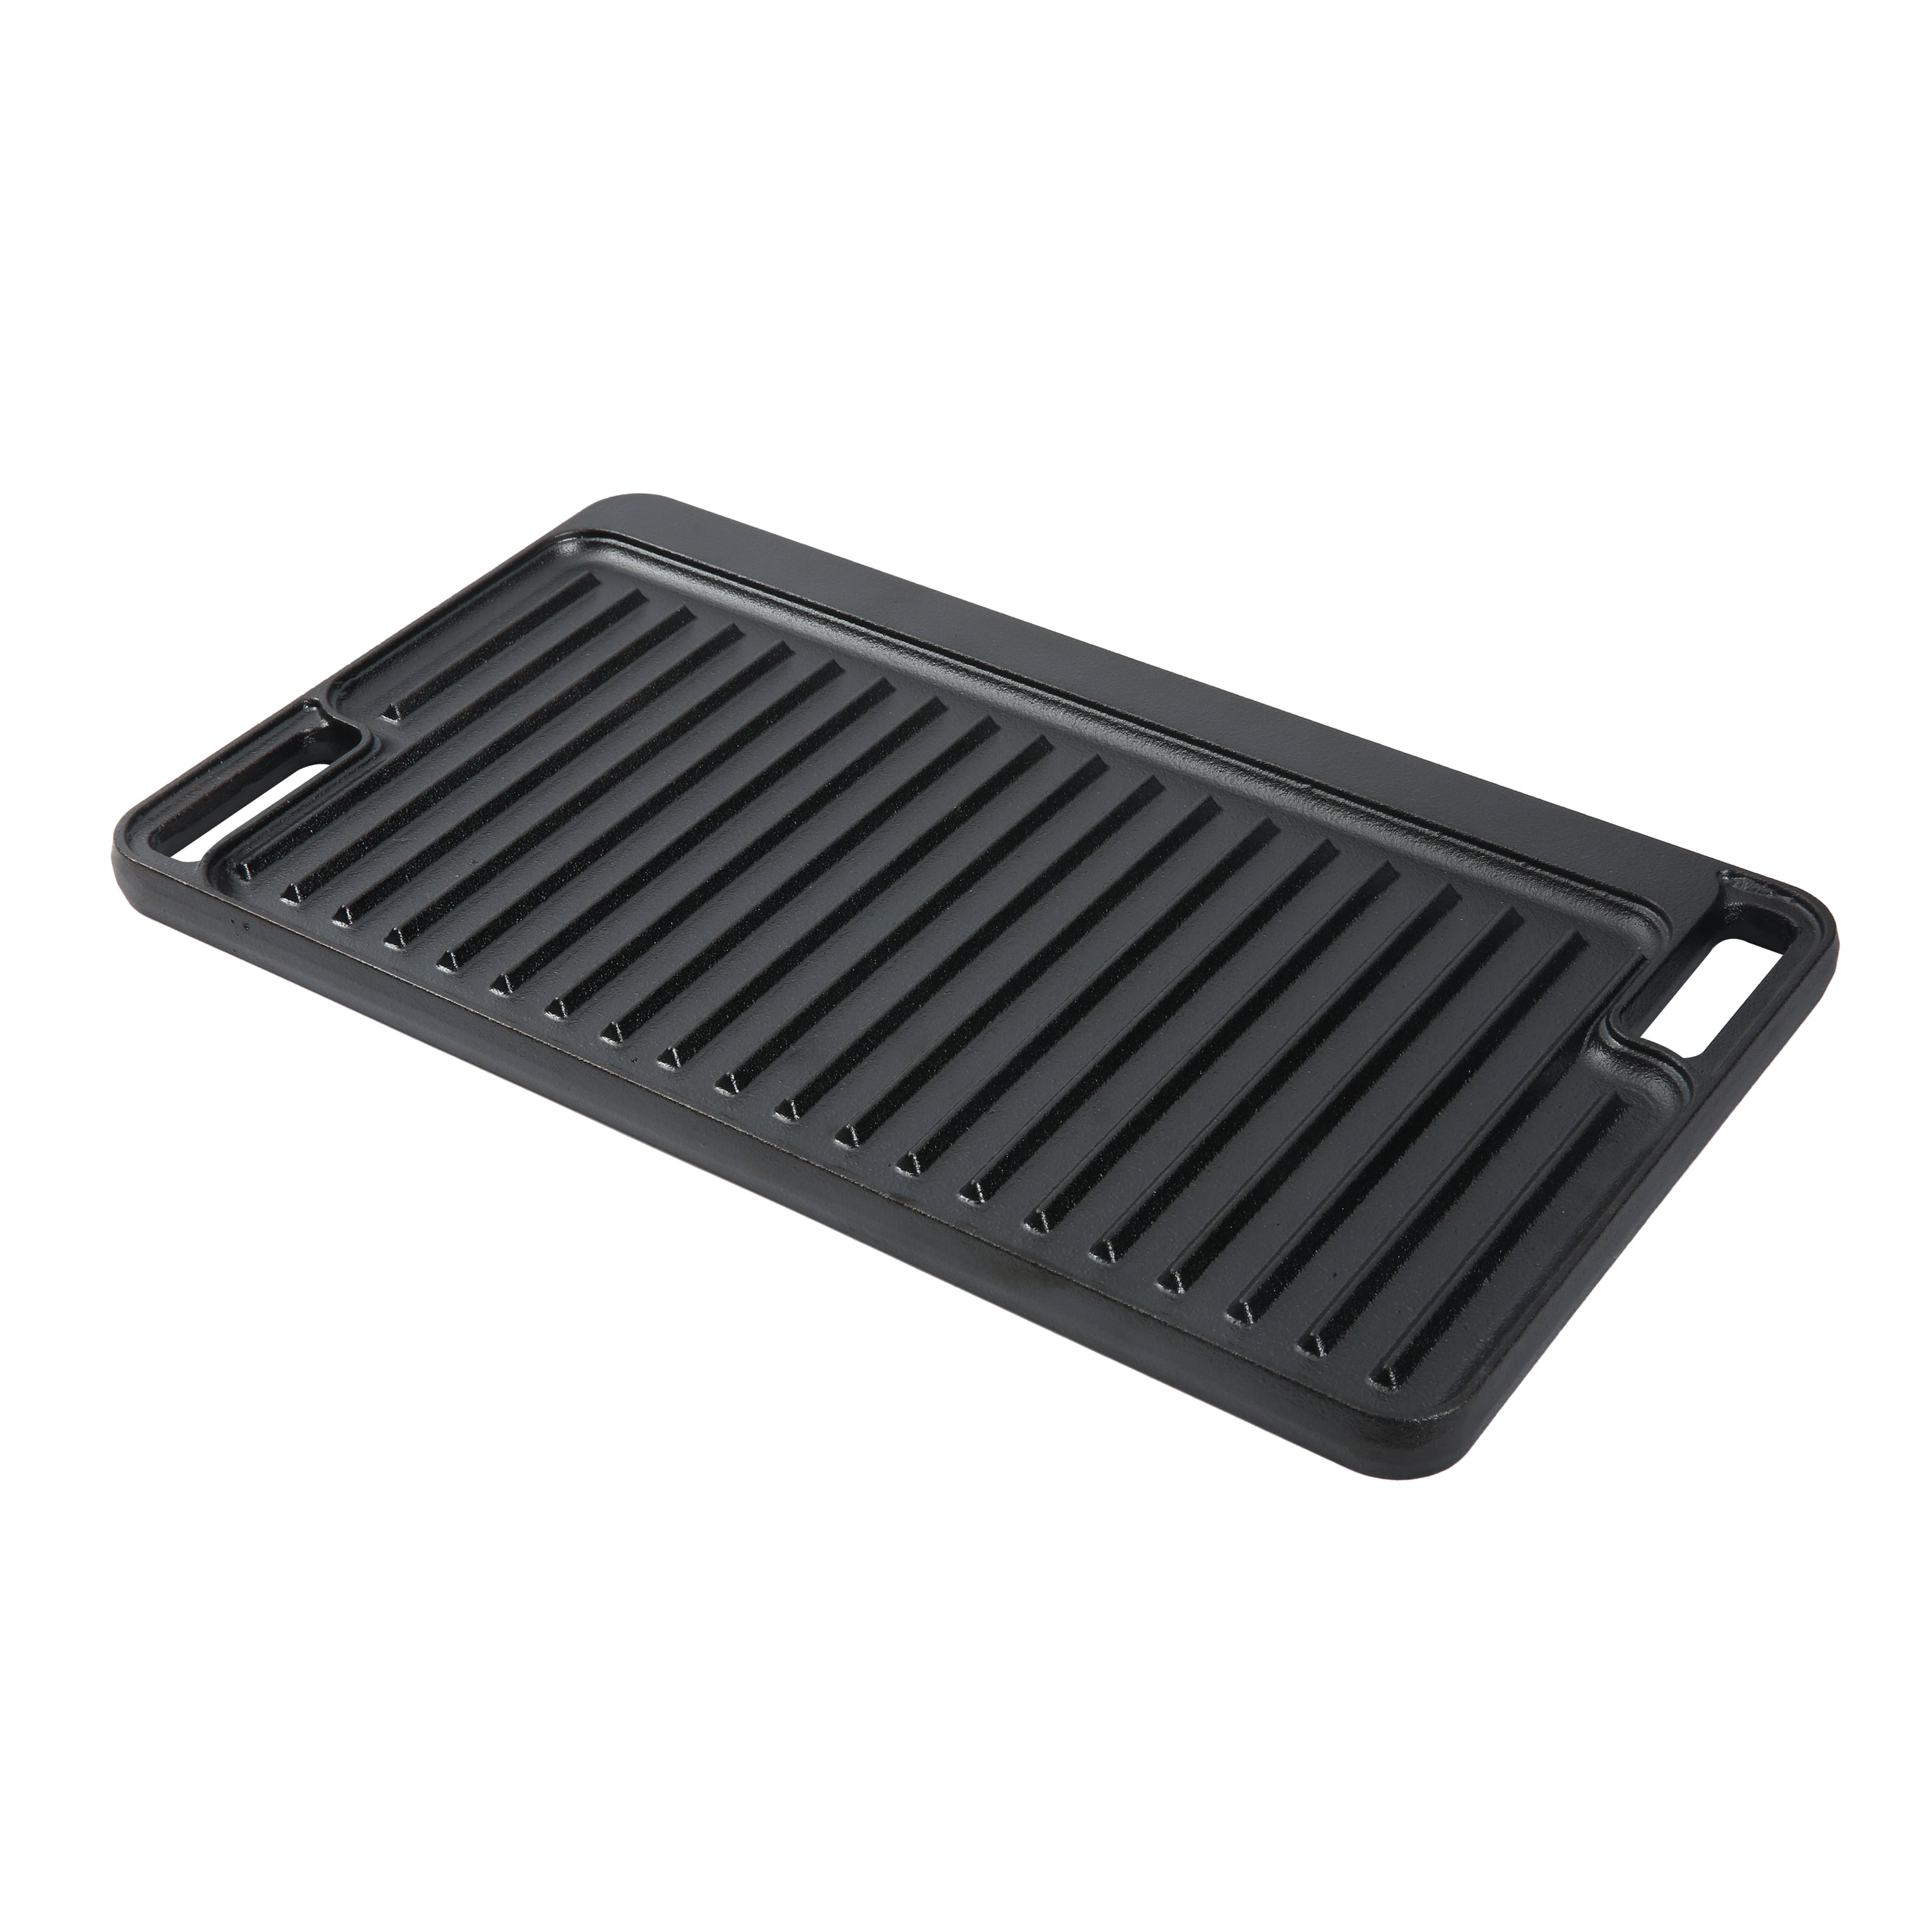 Cast Iron Reversible Grill Griddle Pan Hamburger Steak Stove Top Fry 🌟  BRAND NEW, FREE SHIPPING, - Griddles & Grills - Newtown, Bucks County,  Pennsylvania, Facebook Marketplace